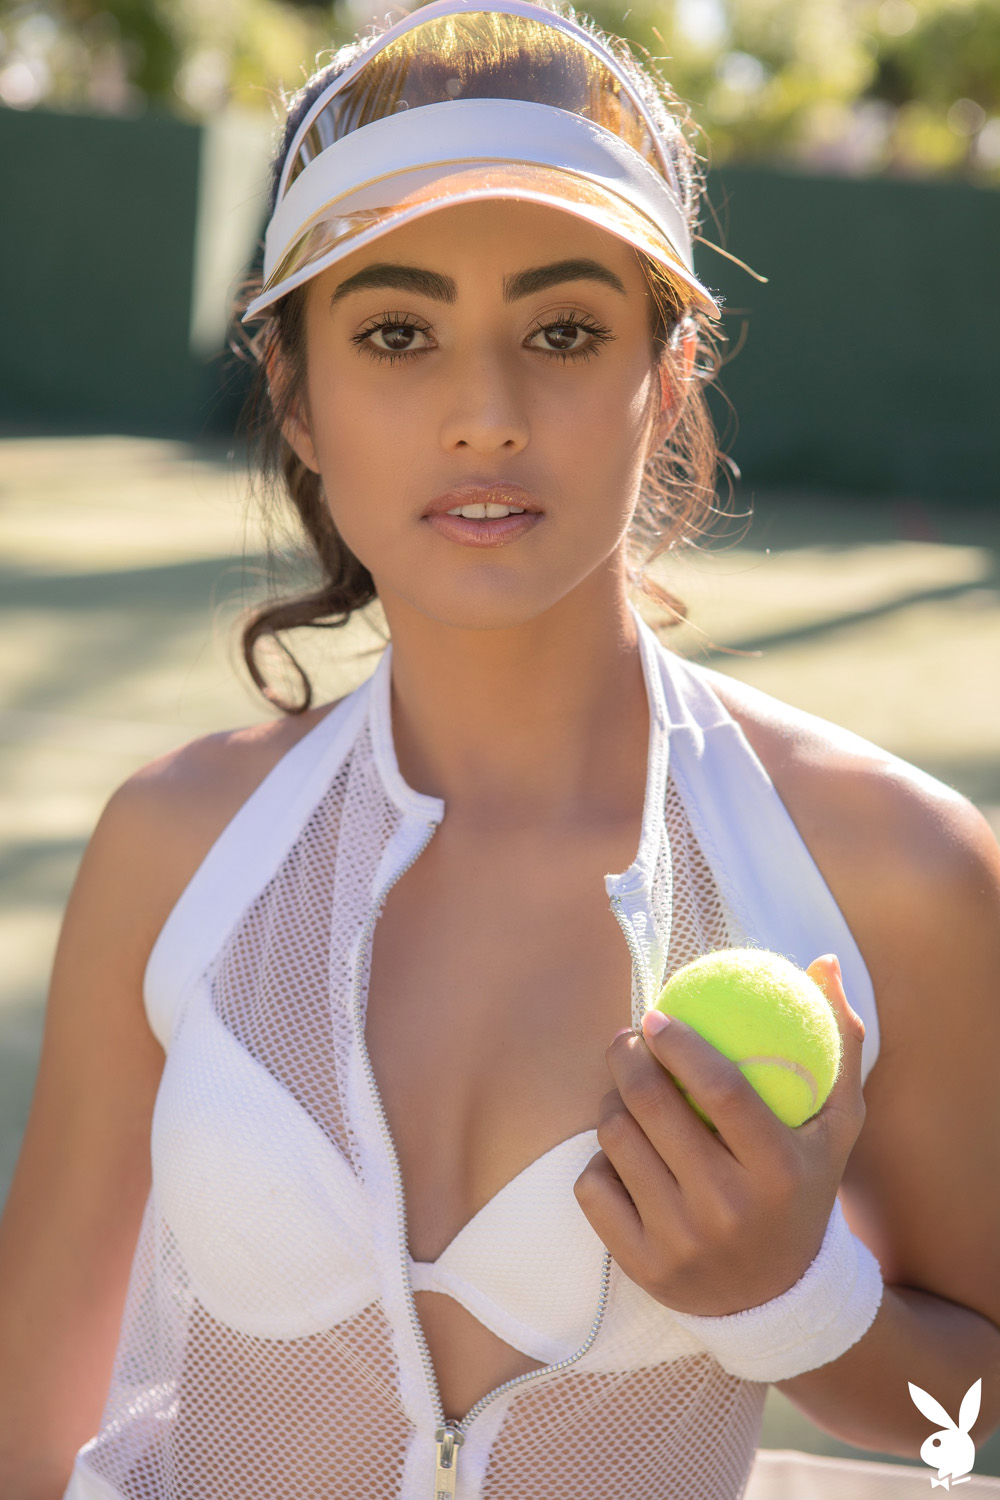 Katherinne Sofia reveals her flawless all natural figure on the tennis court